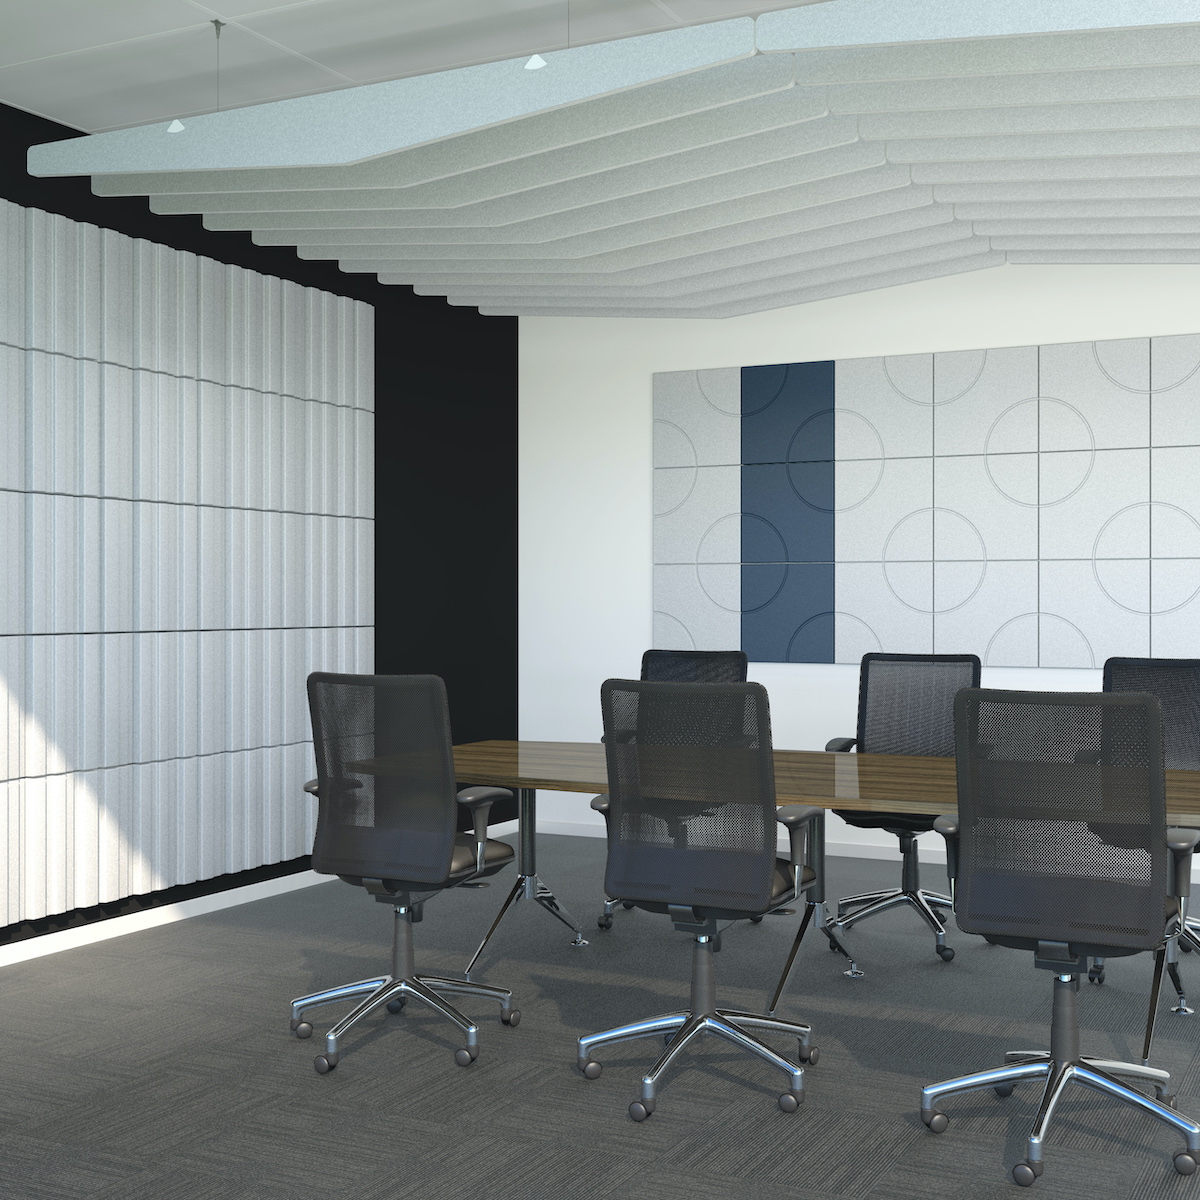 Opus acoustic blades attached in ceiling in meeting room along with acoustic tiles on the walls. Acoustic blades & tiles working together to improve acoustics and reverberate noise of indoor space. Manufactured & sold by Acoustek Australia.